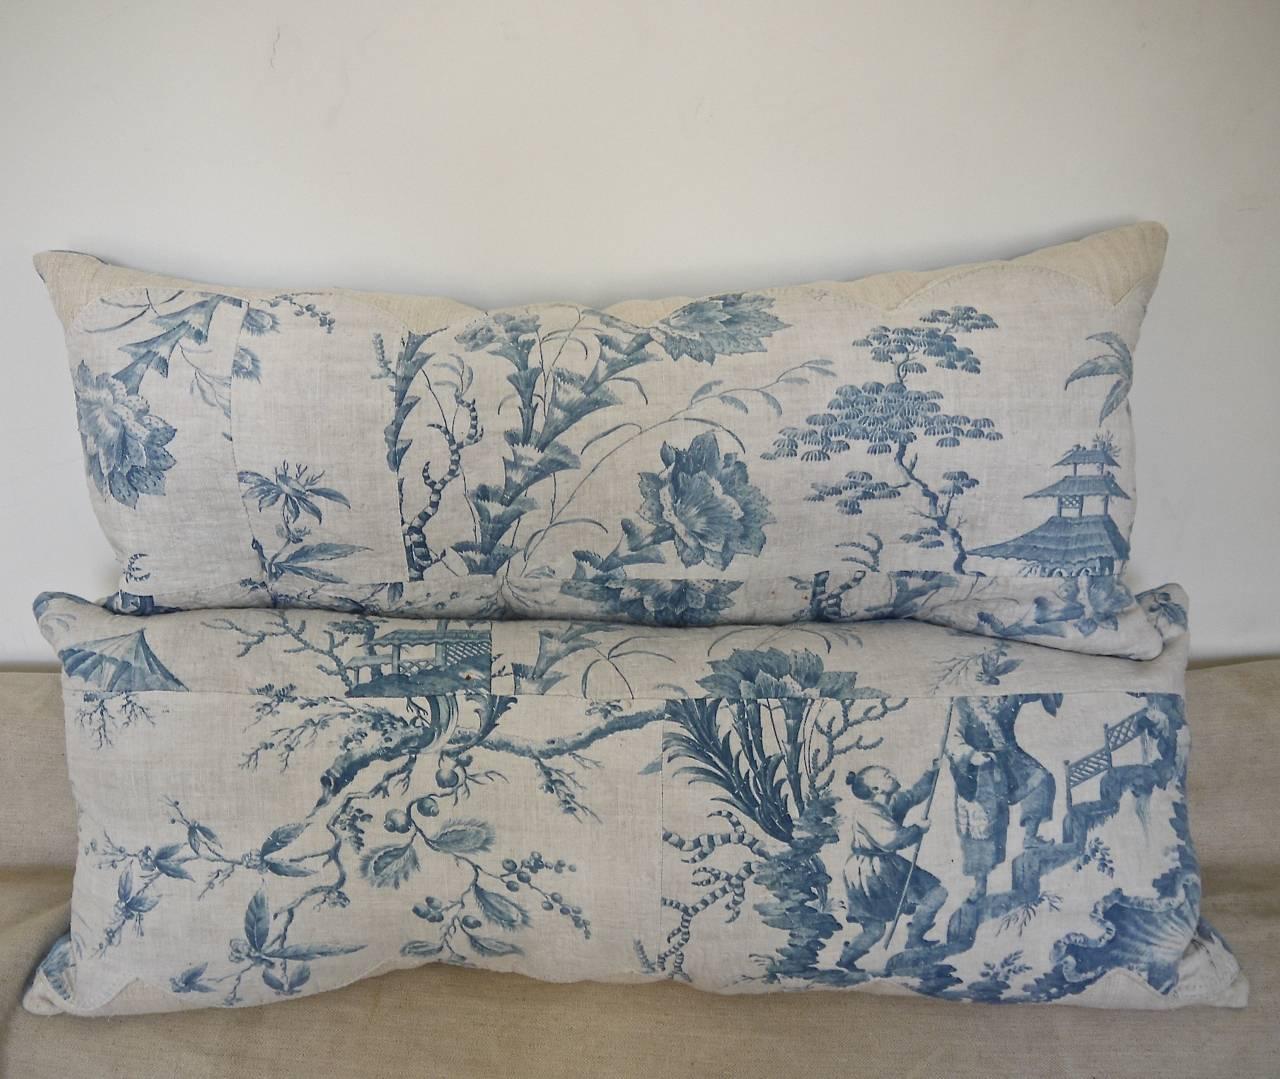  Chinoiserie Toile Blue and White pillow French 18th century 3